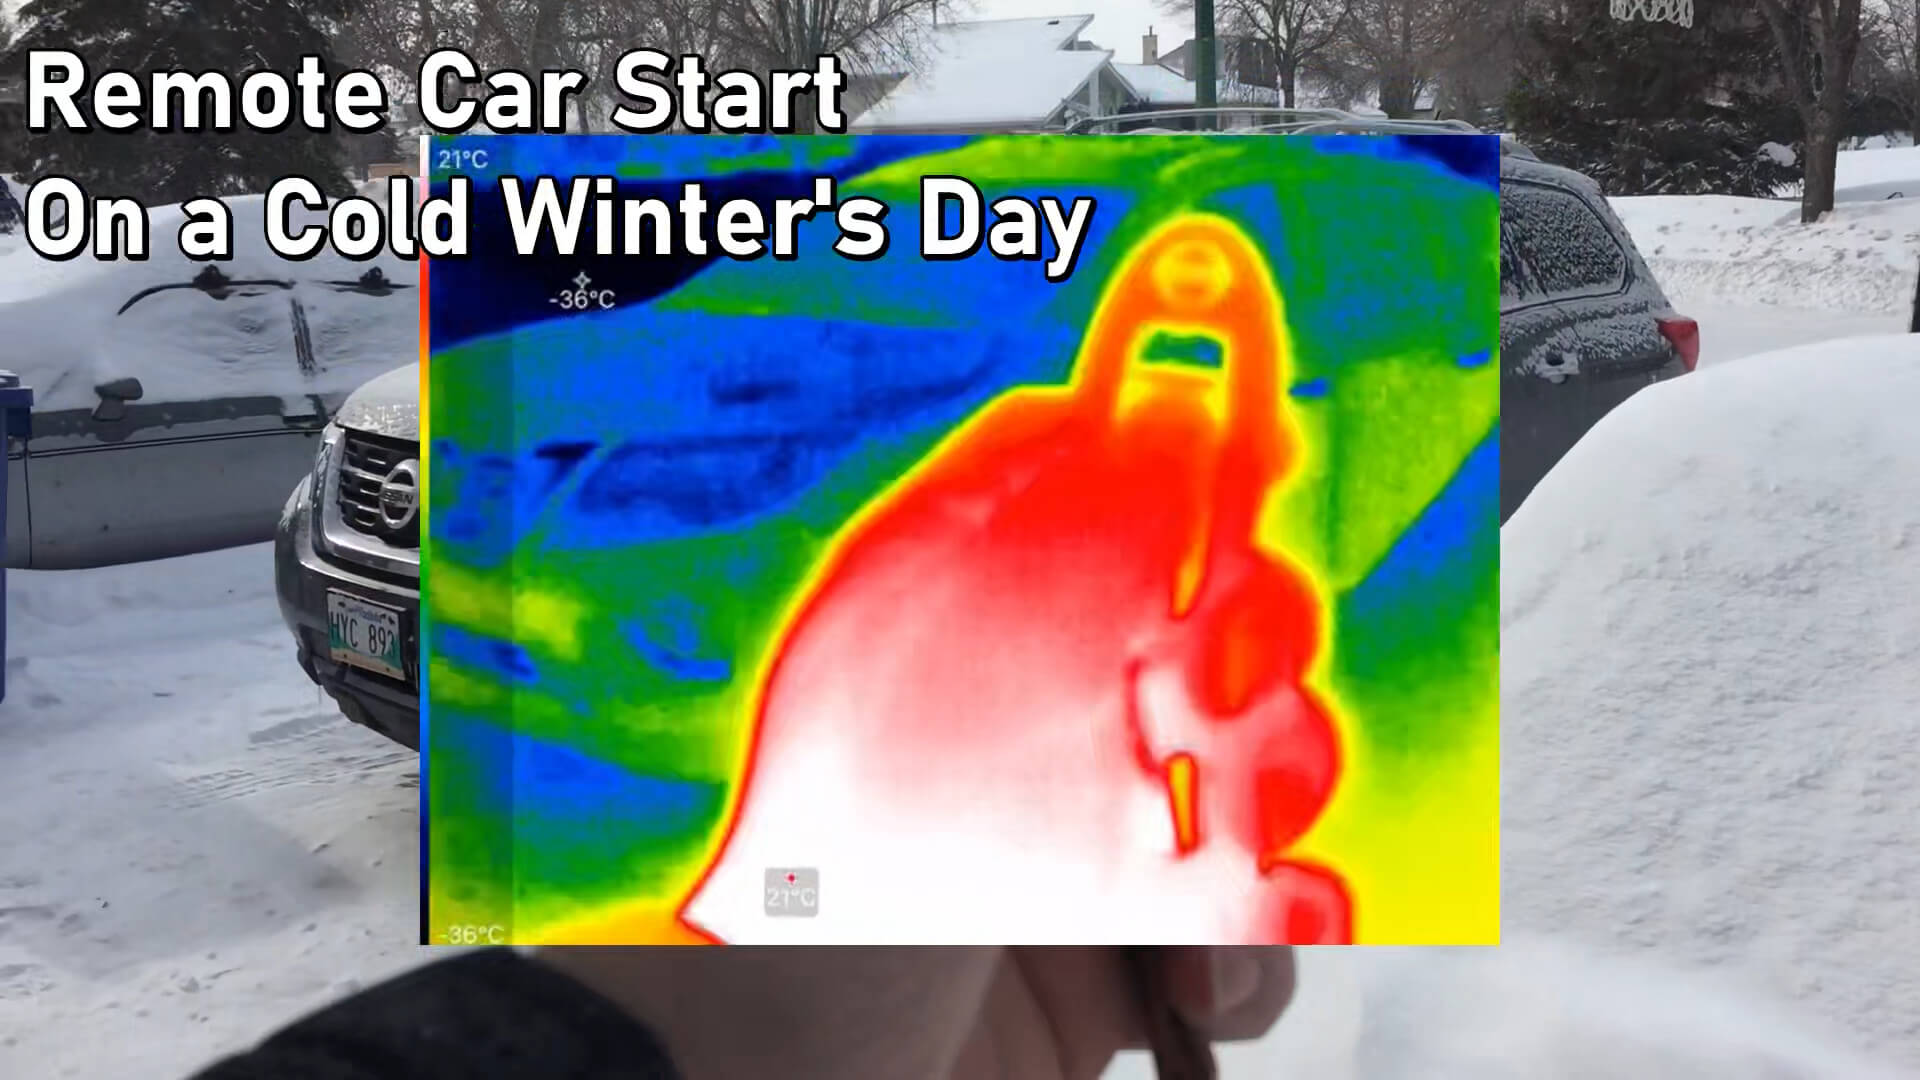 Remote Car Start on a Cold Winter Day